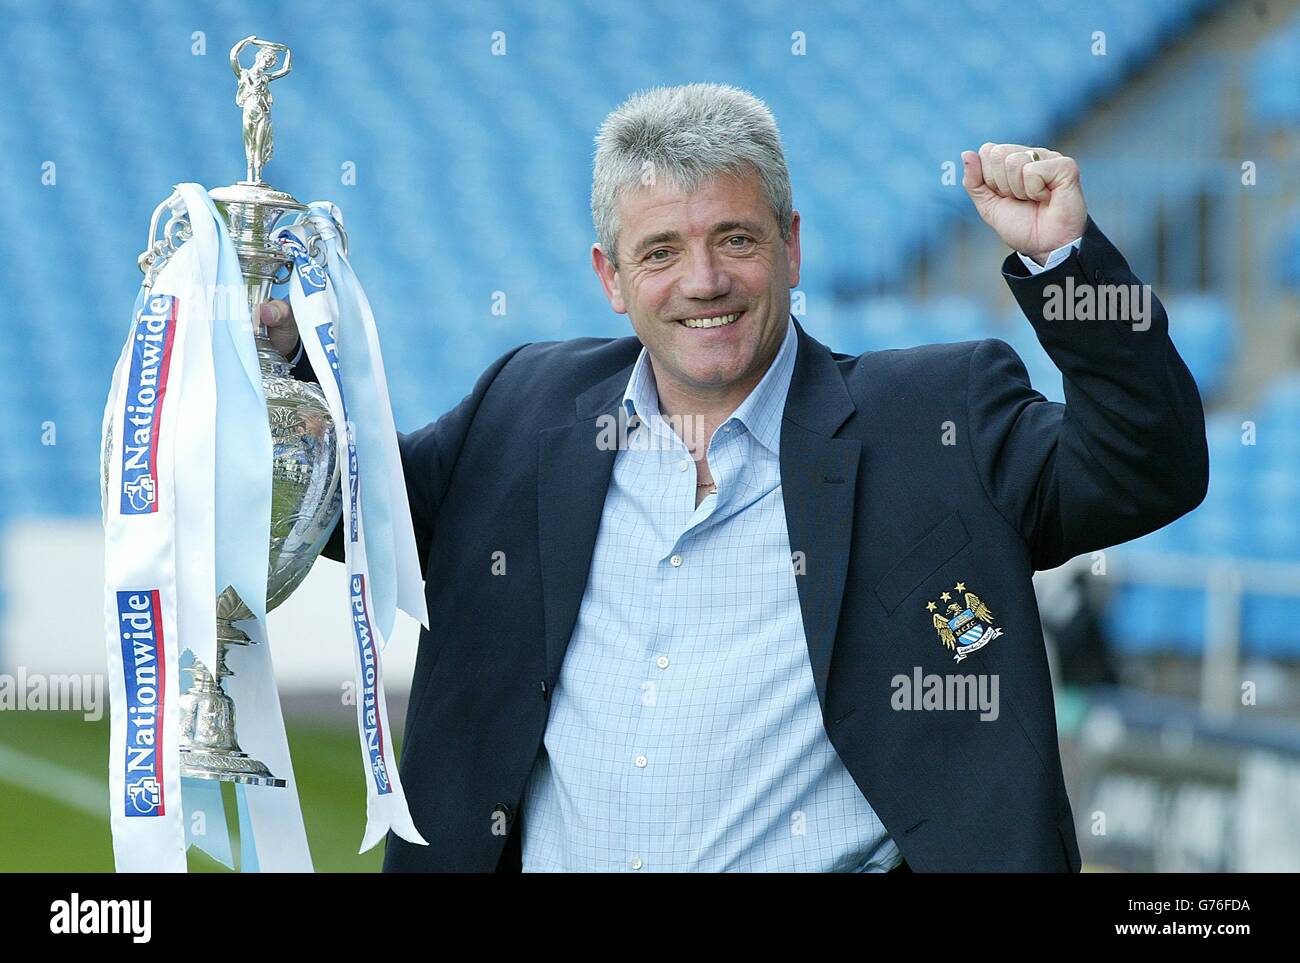 Manchester City manager Kevin Keegan holds the Nationwide Division One trophy aloft after his side's 3-1 victoory against Portsmoouth at Maine Road, Manchester. NO UNOFFICIAL CLUB WEBSITE USE. Stock Photo